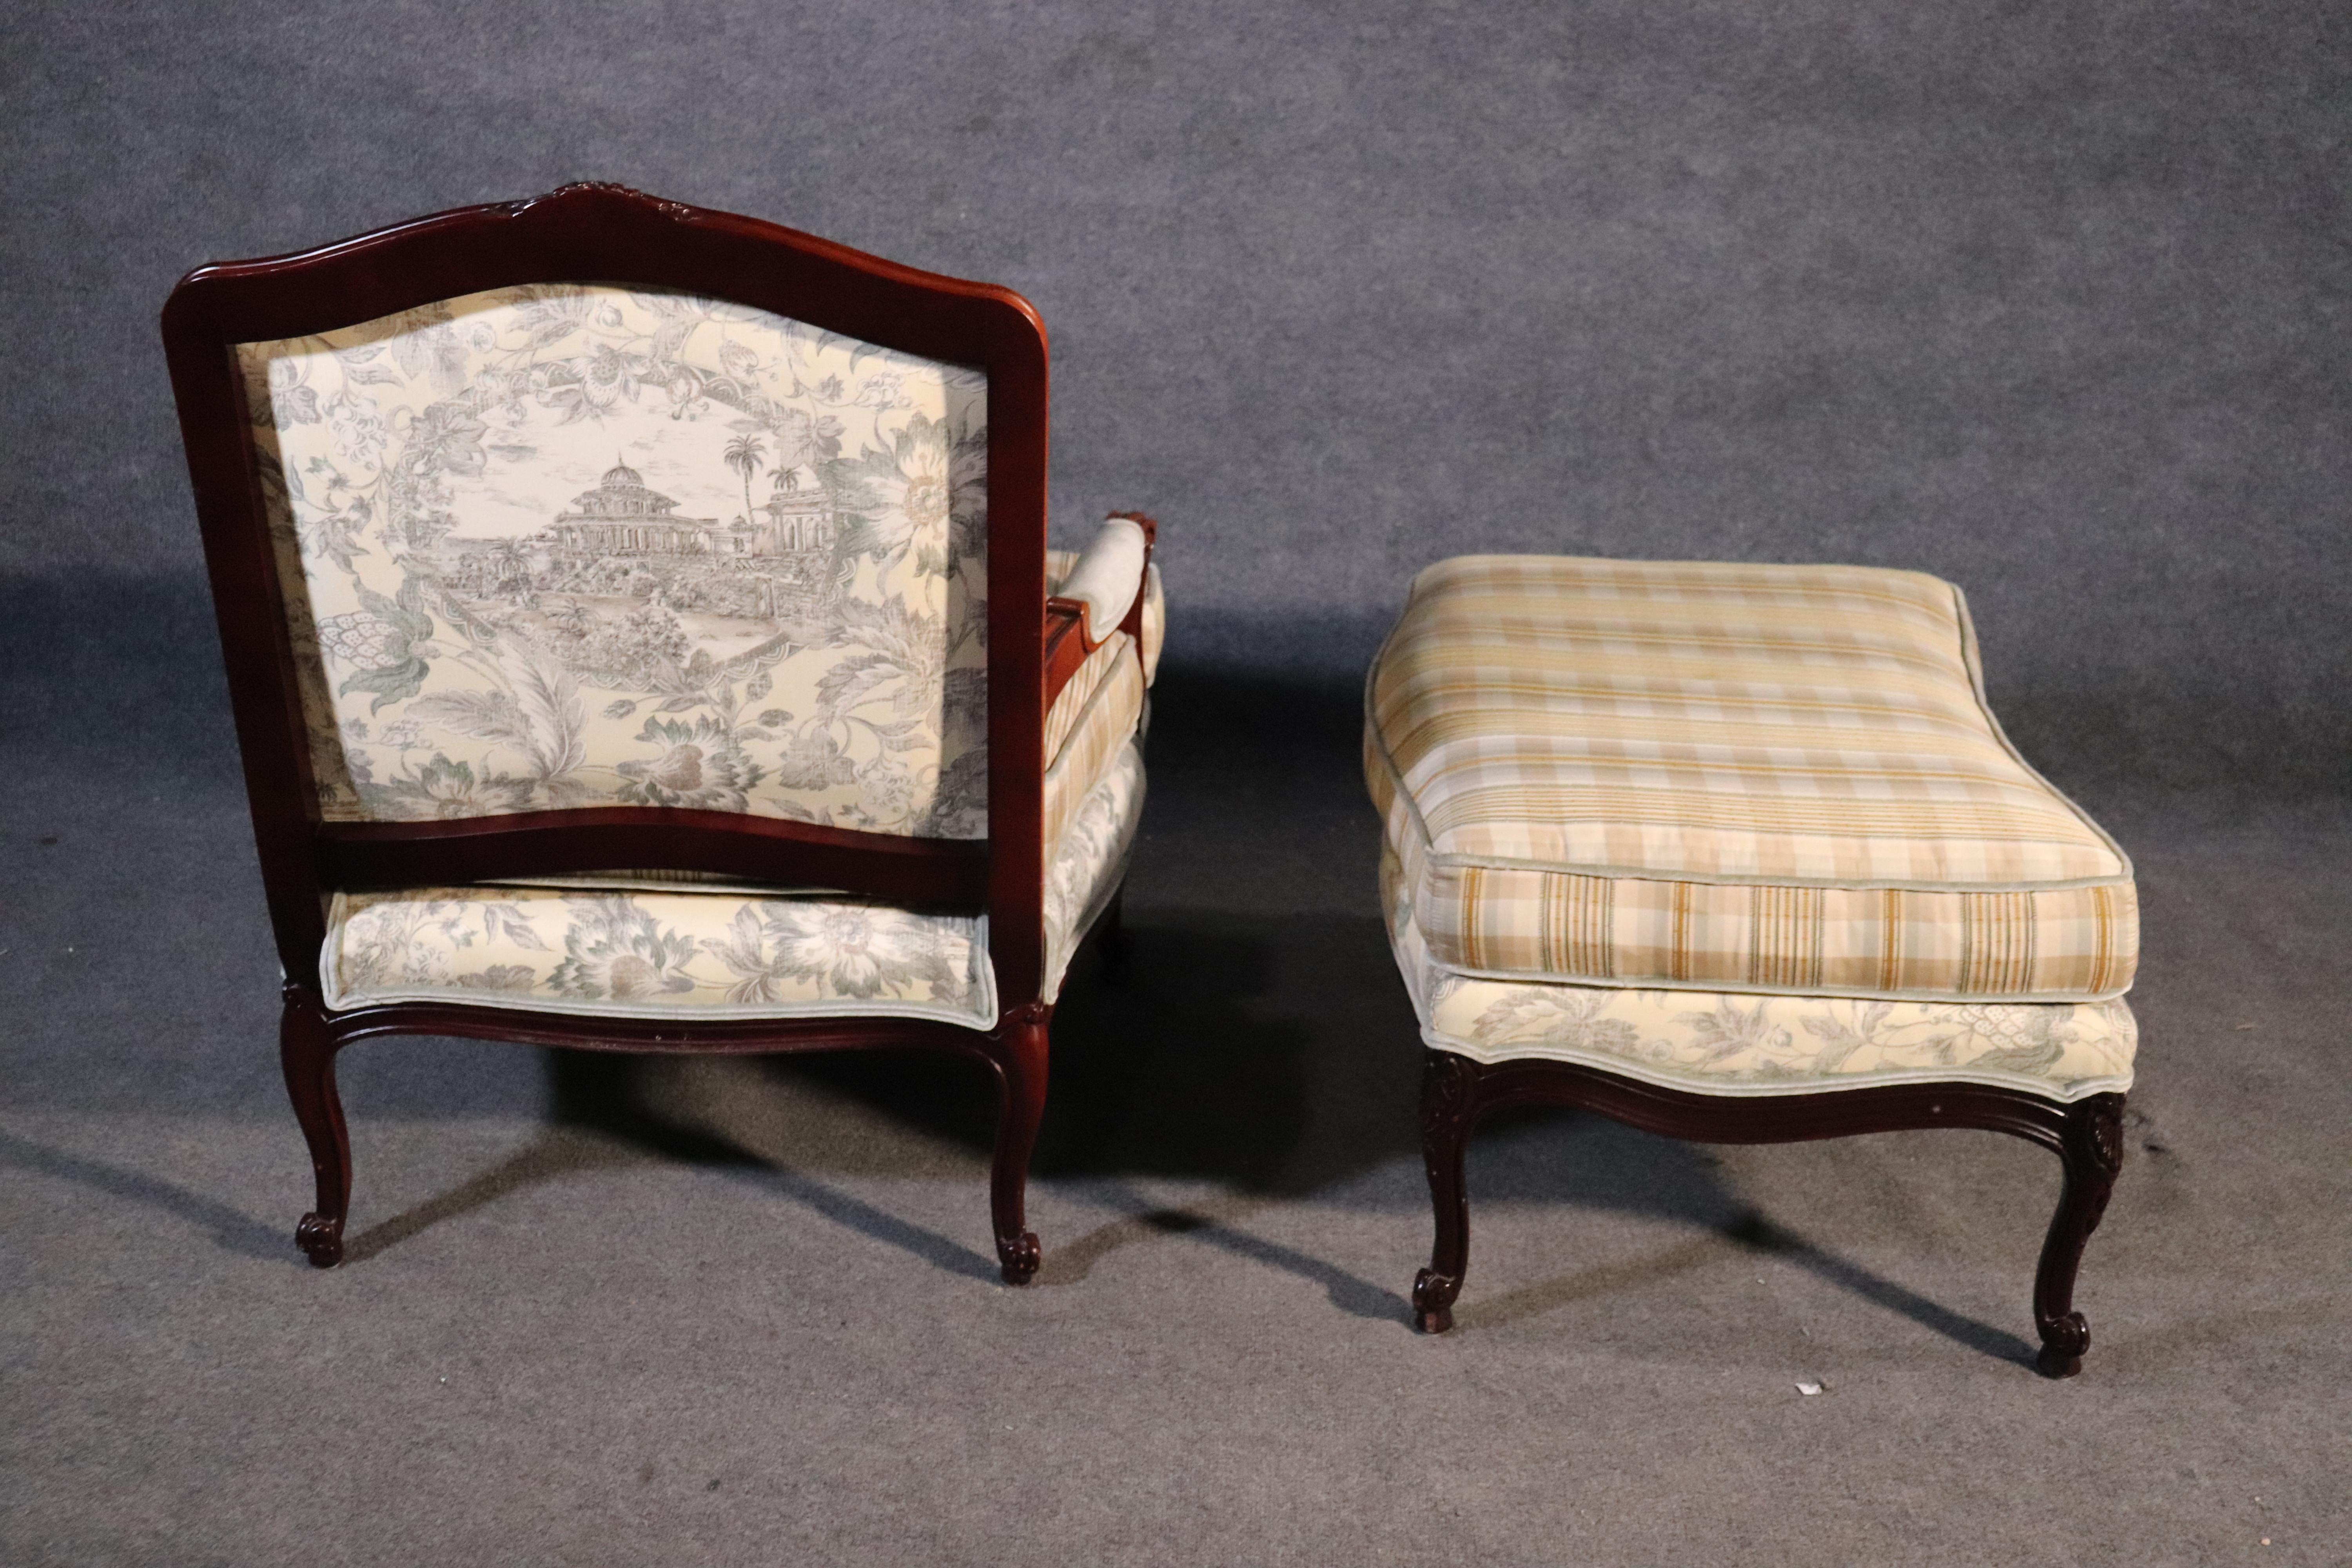 Contemporary French Louis XV Style Walnut Taylor King Bergère Chair and Ottoman Toile Gingham